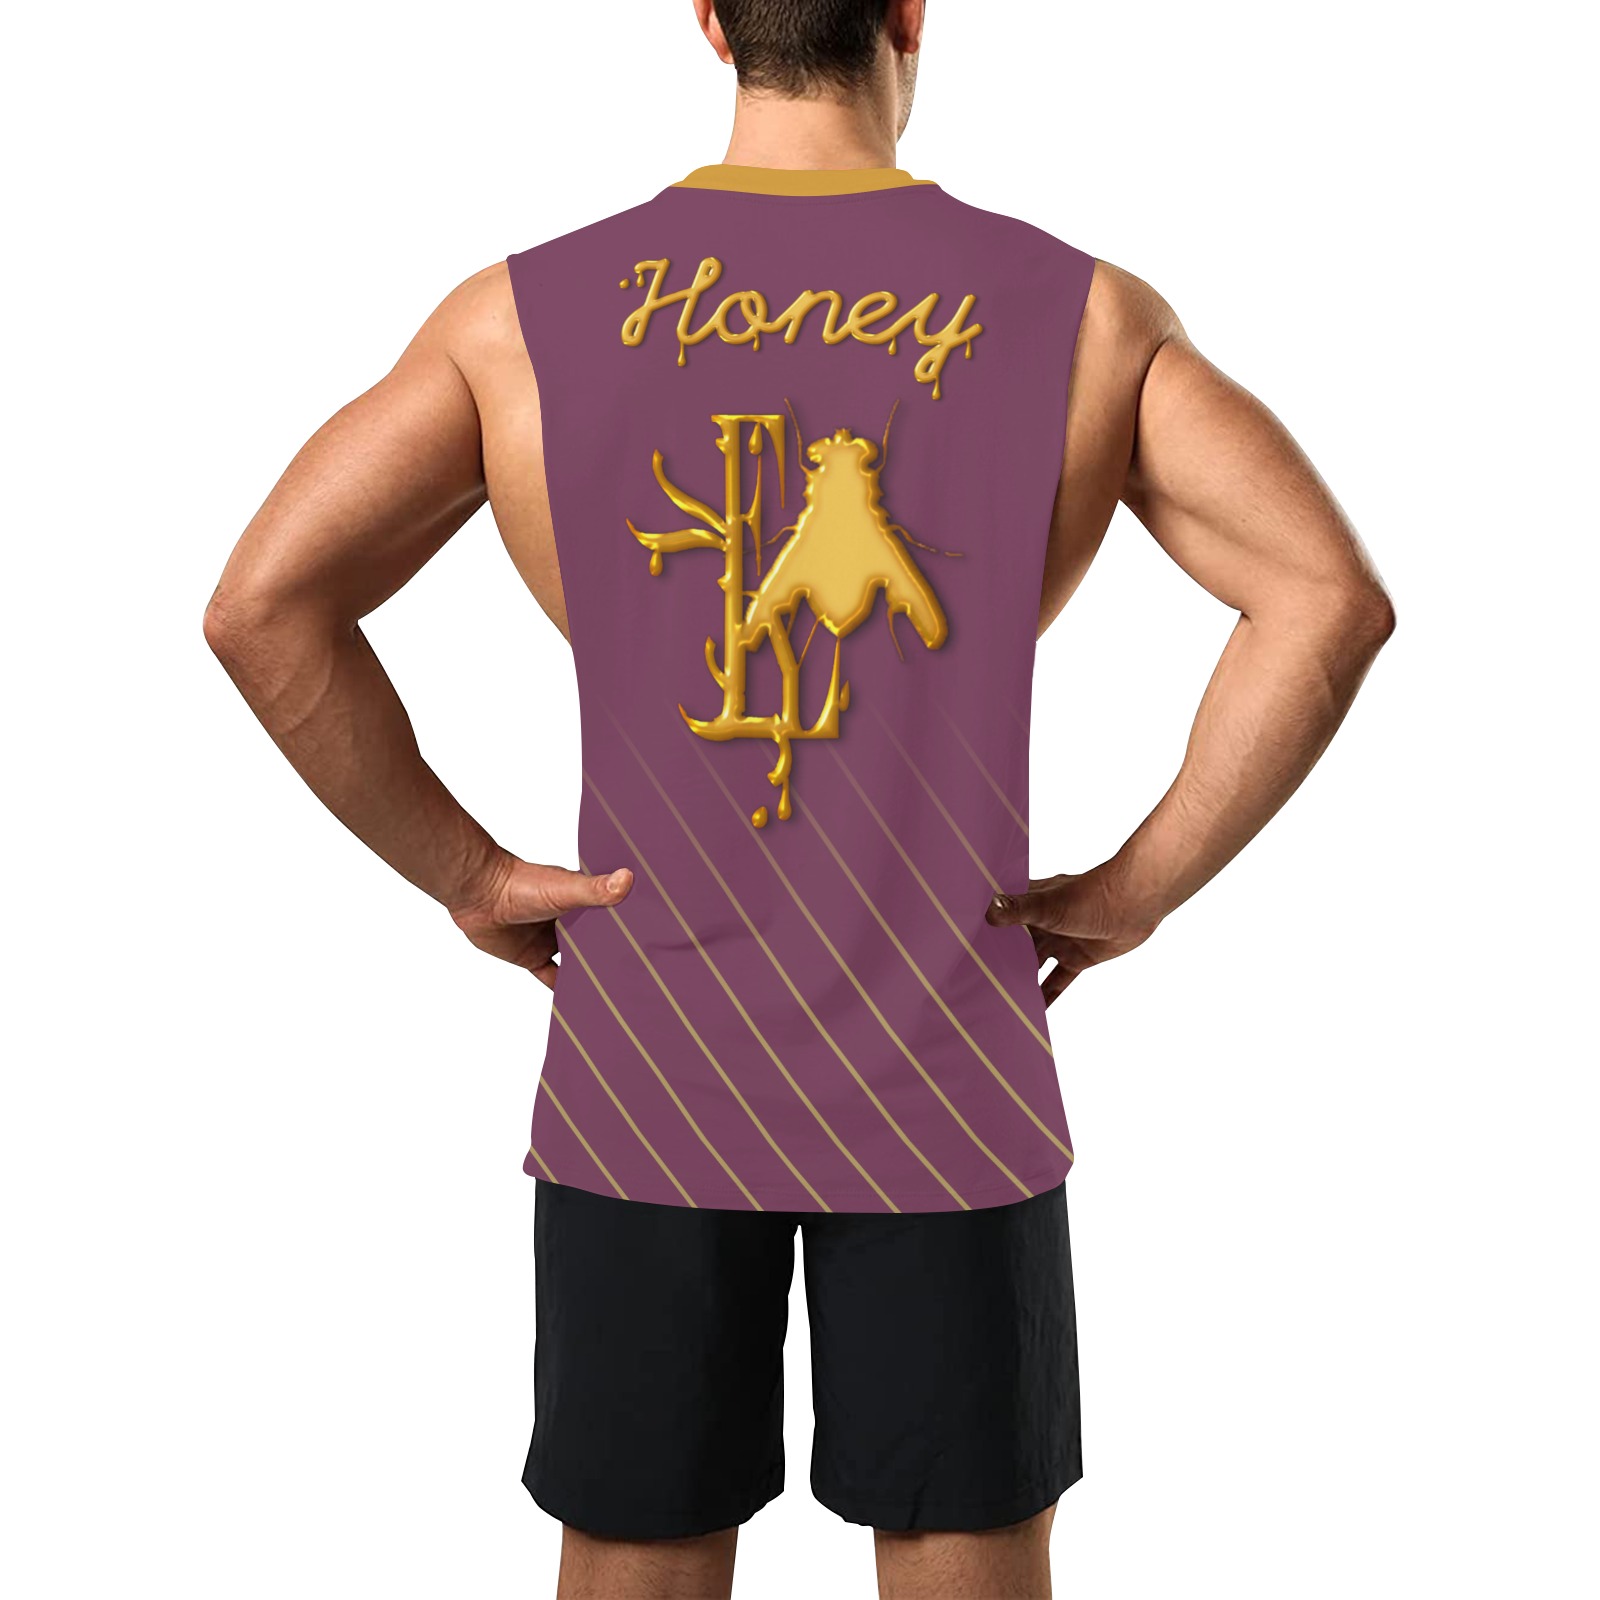 Honey Collectable Fly Men's Open Sides Workout Tank Top (Model T72)